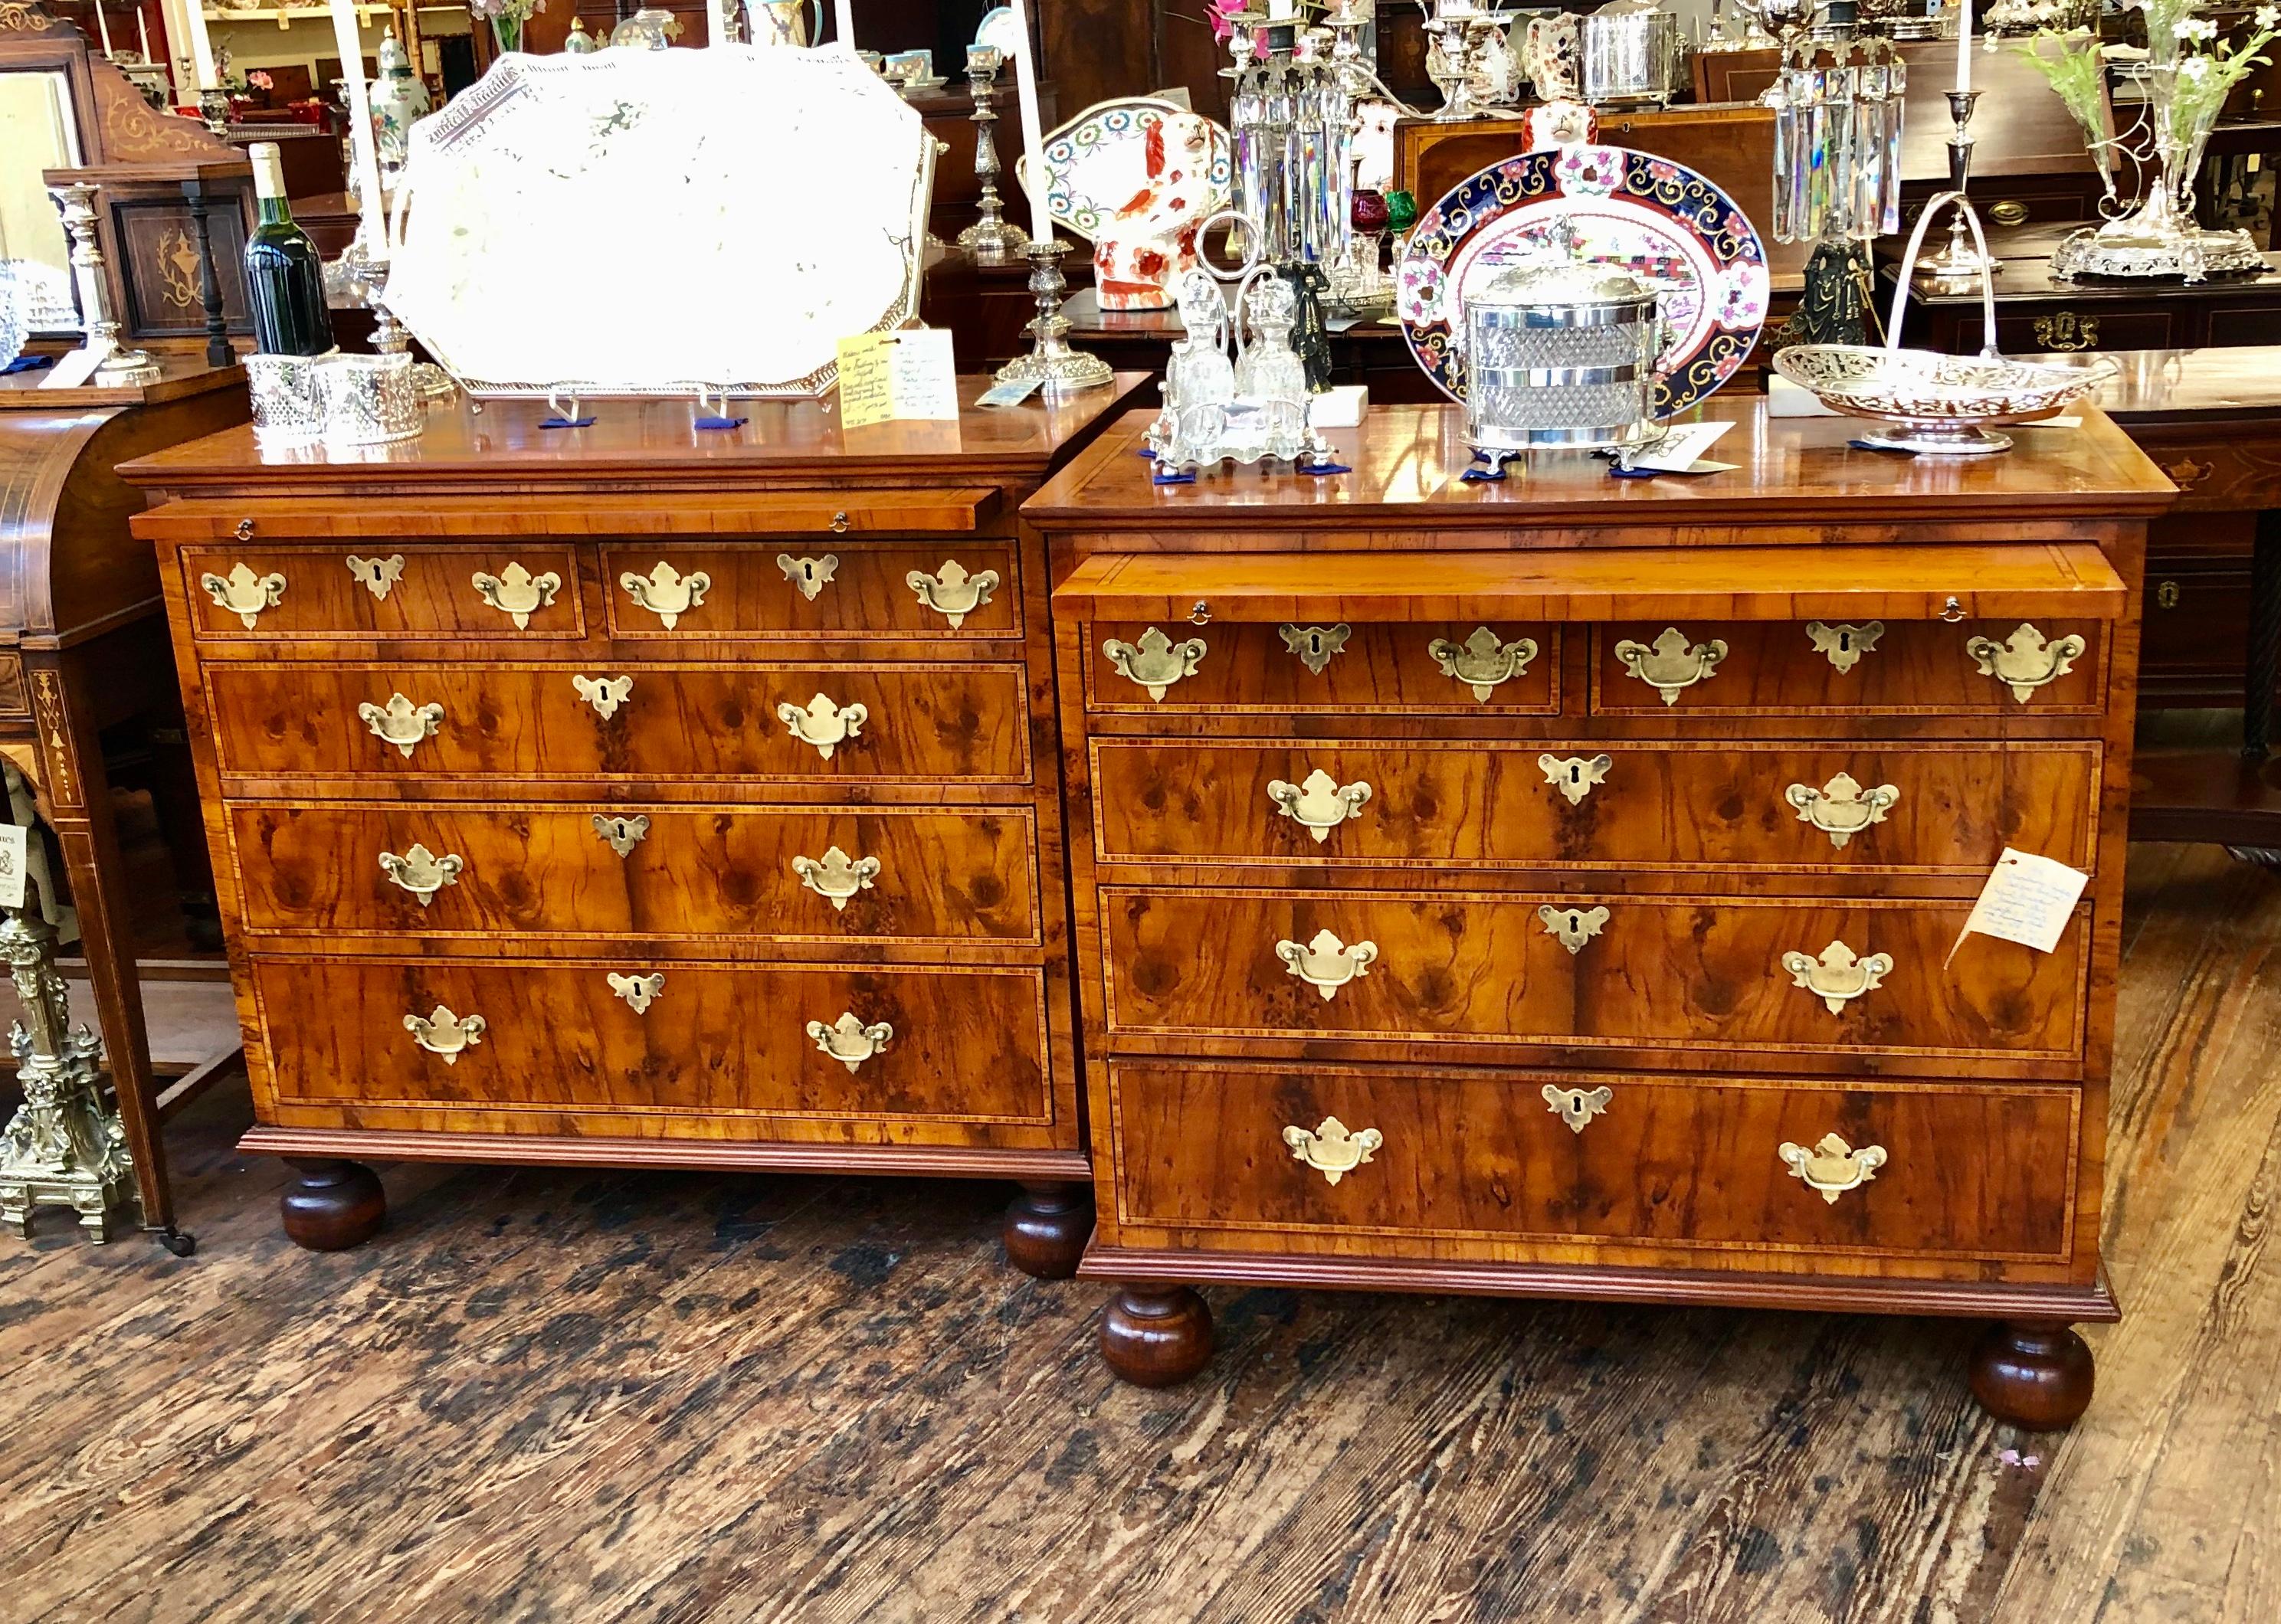 Pair of exceptionally rare and fine antique English inlaid yew wood Queen Anne Revival bachelor's chests with tulipwood inlay, bunn feet and inlaid brushing slides. The condition of the pair is pristine. This pair is very useful in many areas of the